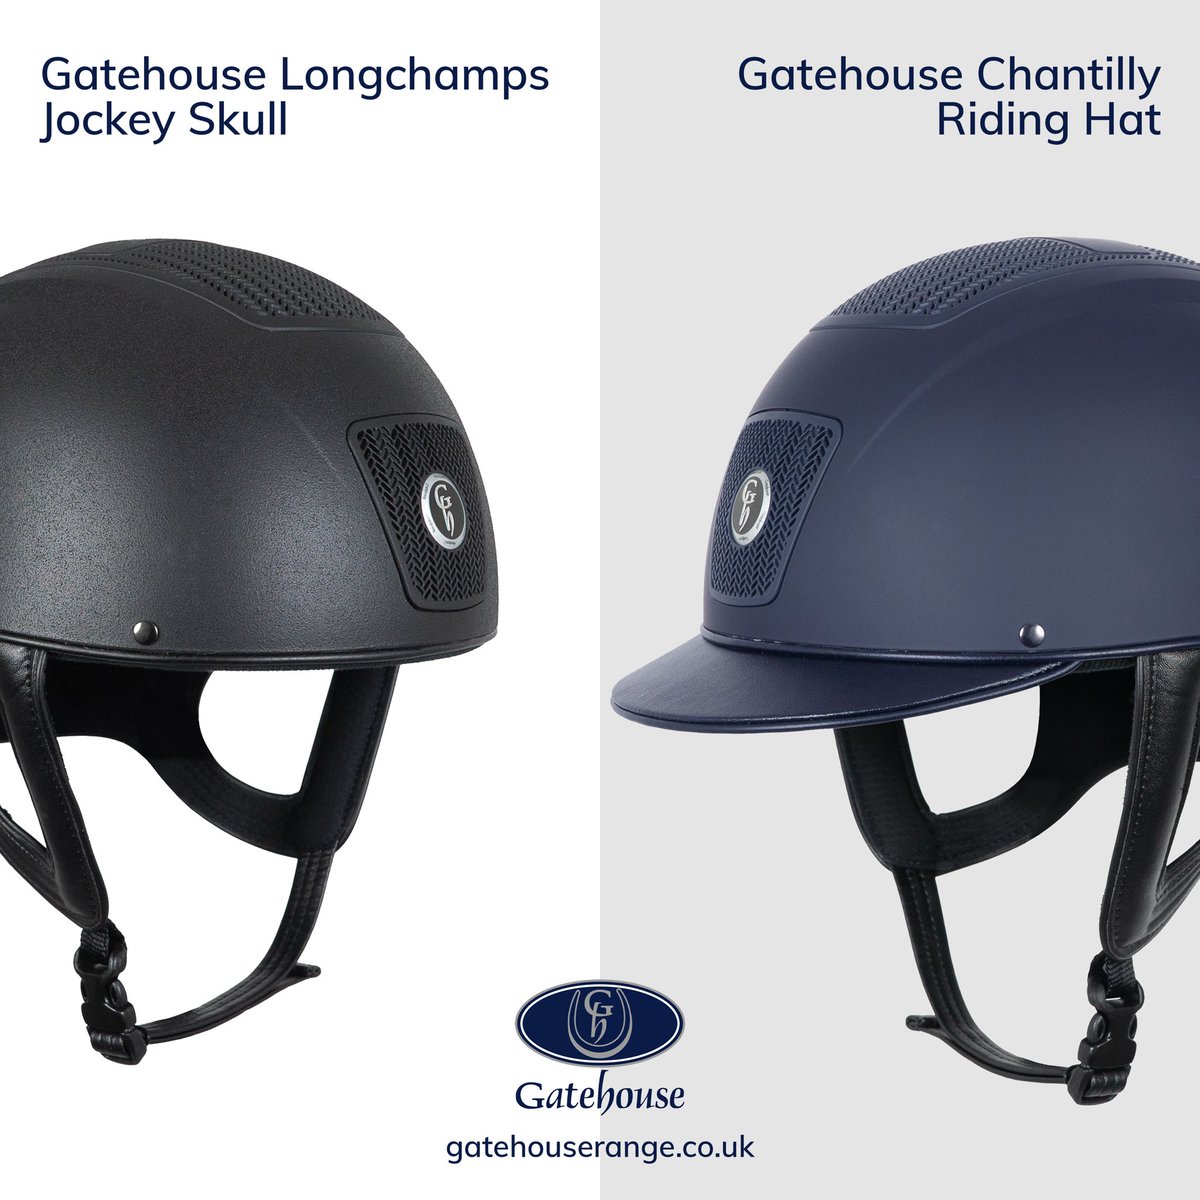 Conforming to PAS 015, these lightweight and well ventilated riding hats are now available 😍 Contact your local Gatehouse stockist to organise a hat fitting today. More info can be found on our website - gatehouserange.co.uk